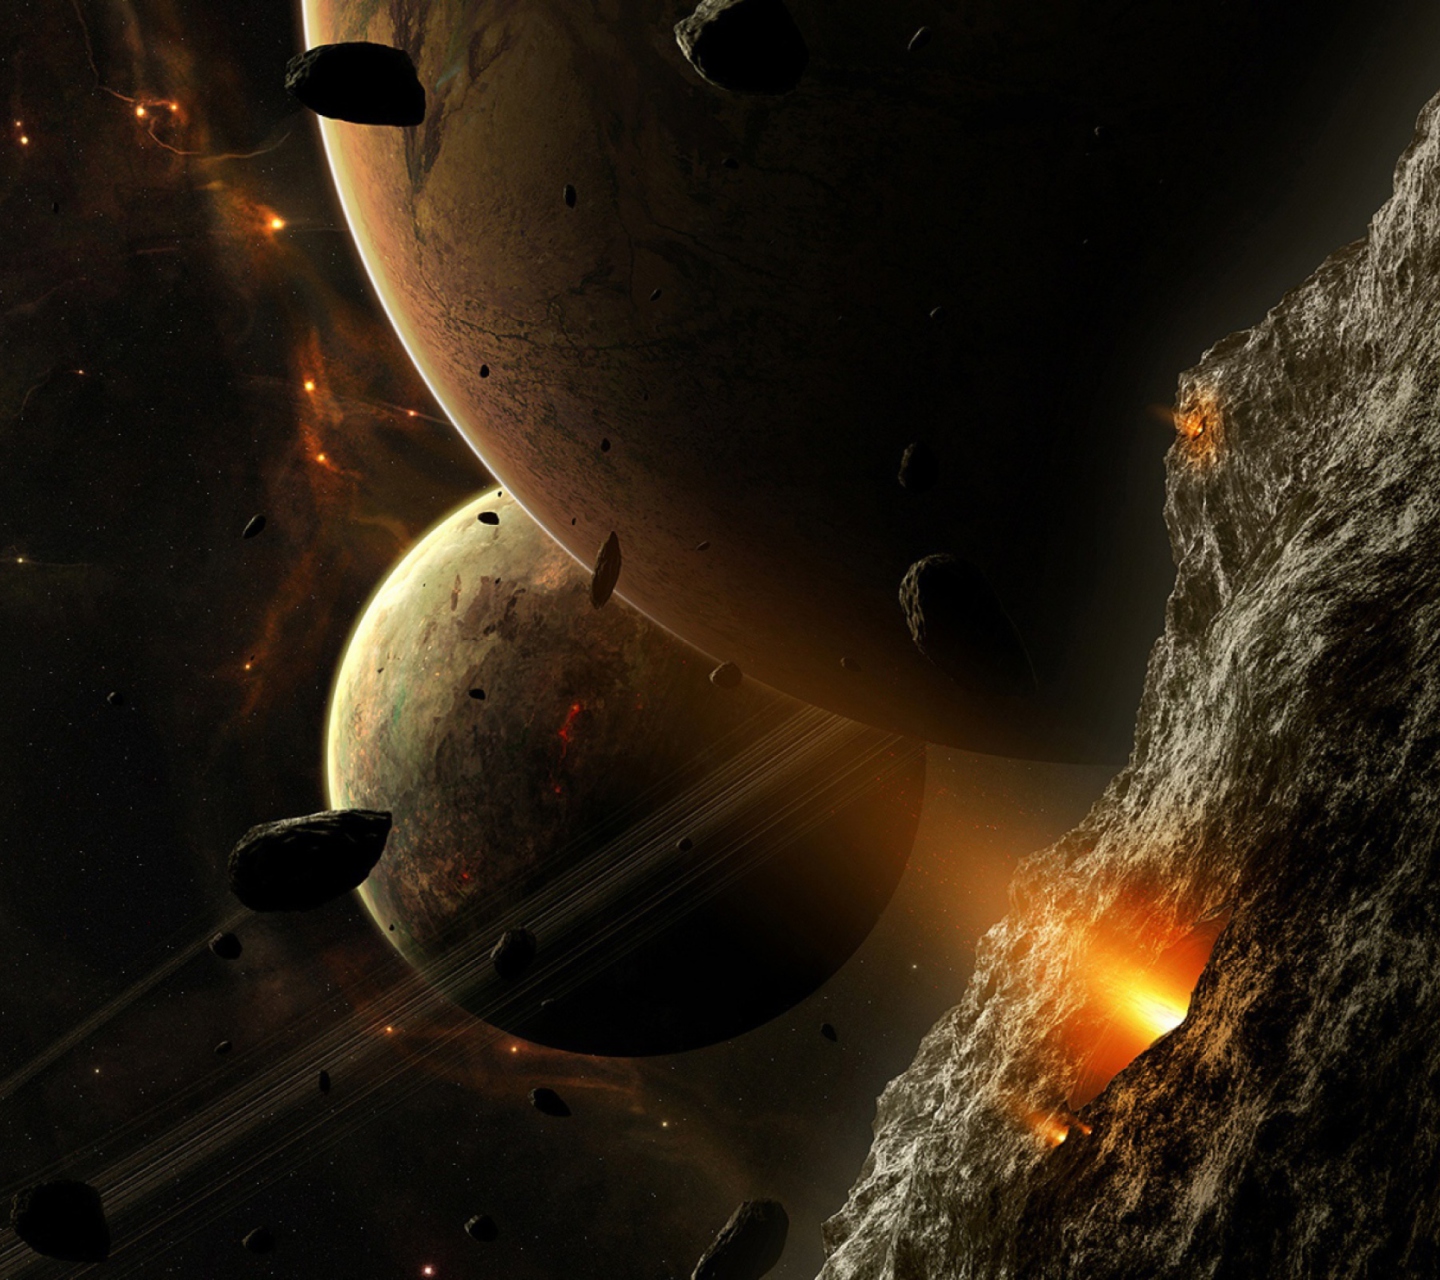 Asteroids And Planets screenshot #1 1440x1280